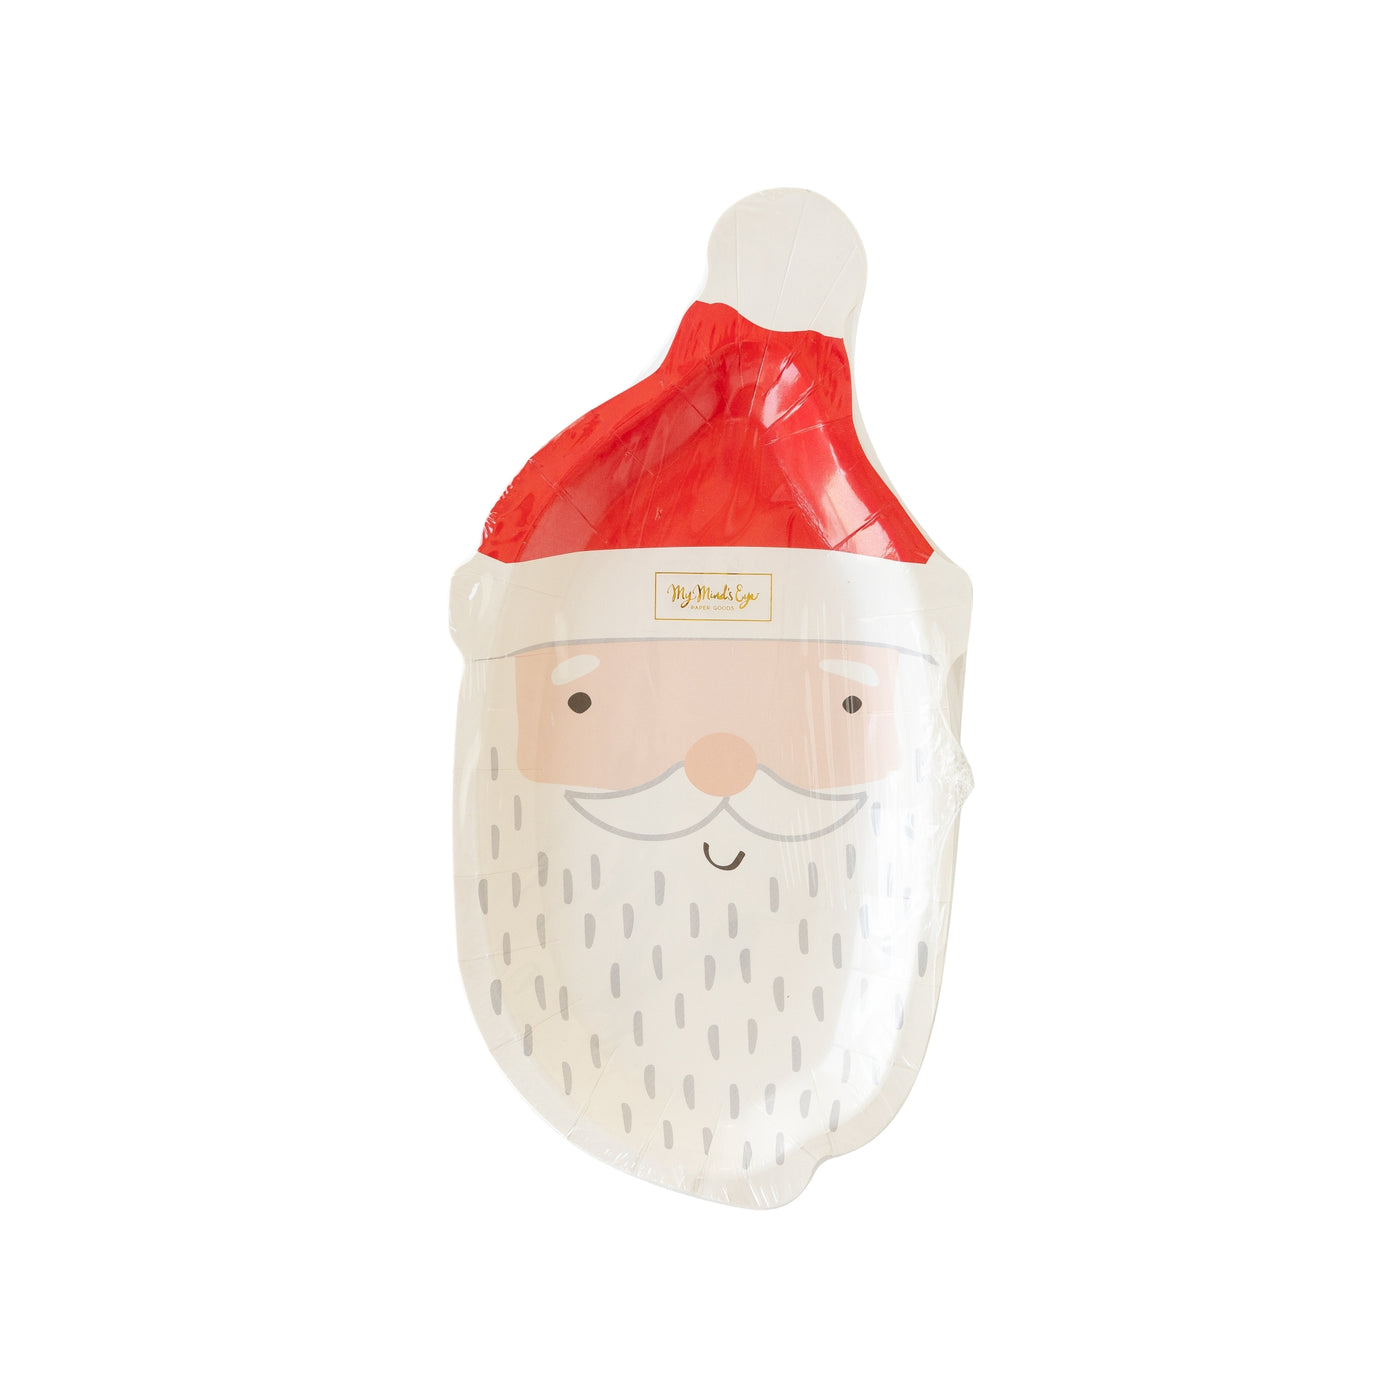 Full Whimsy Santa Collection